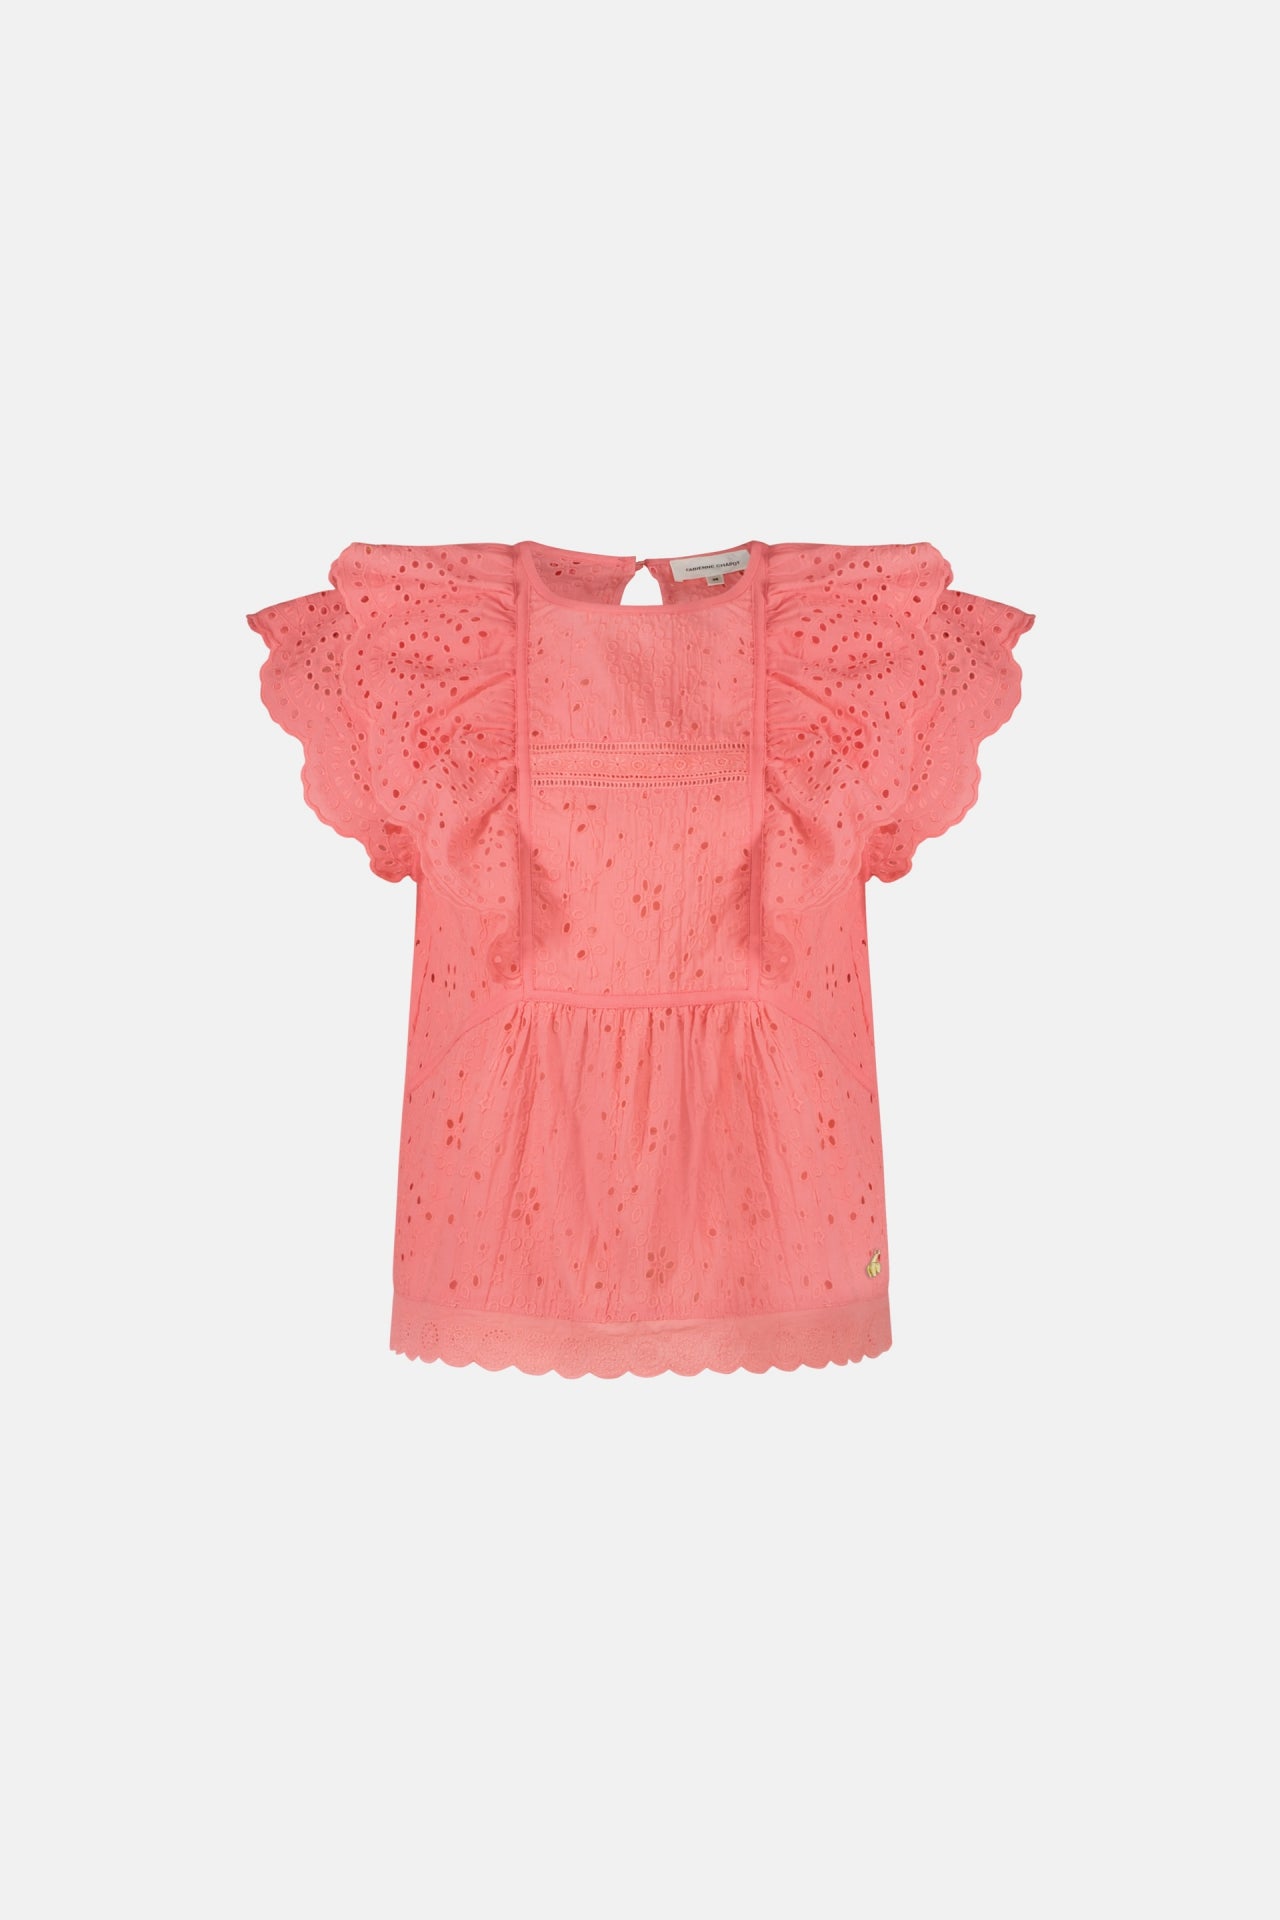 A Gigi Top - Pink Papaya blouse with ruffles and frills made from organic cotton by Fabienne Chapot.